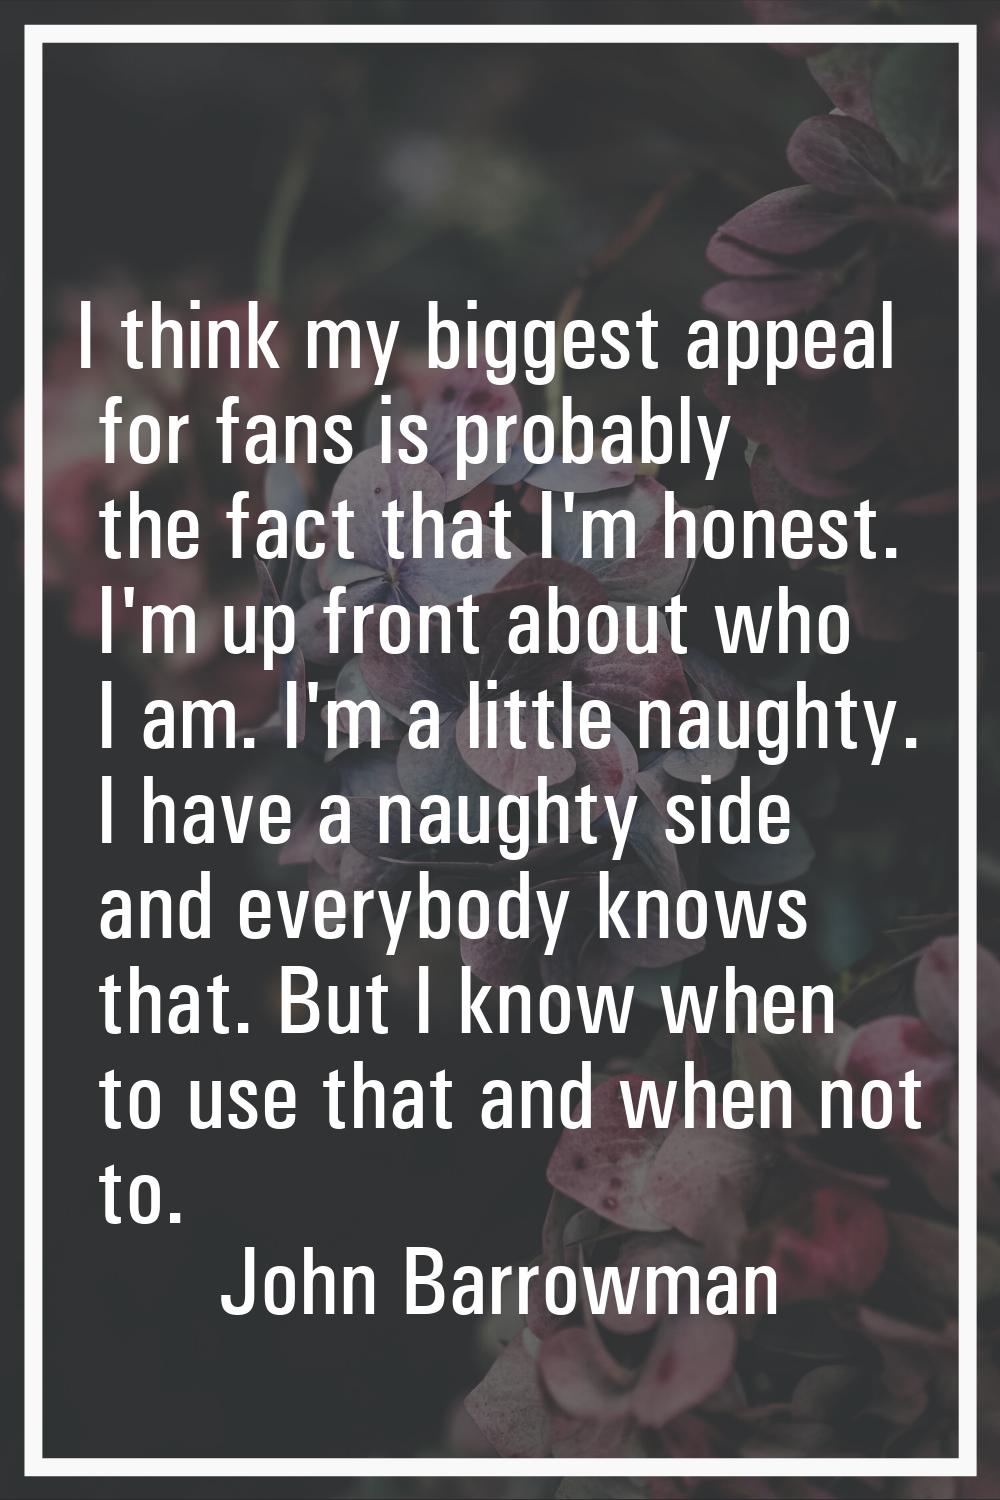 I think my biggest appeal for fans is probably the fact that I'm honest. I'm up front about who I a